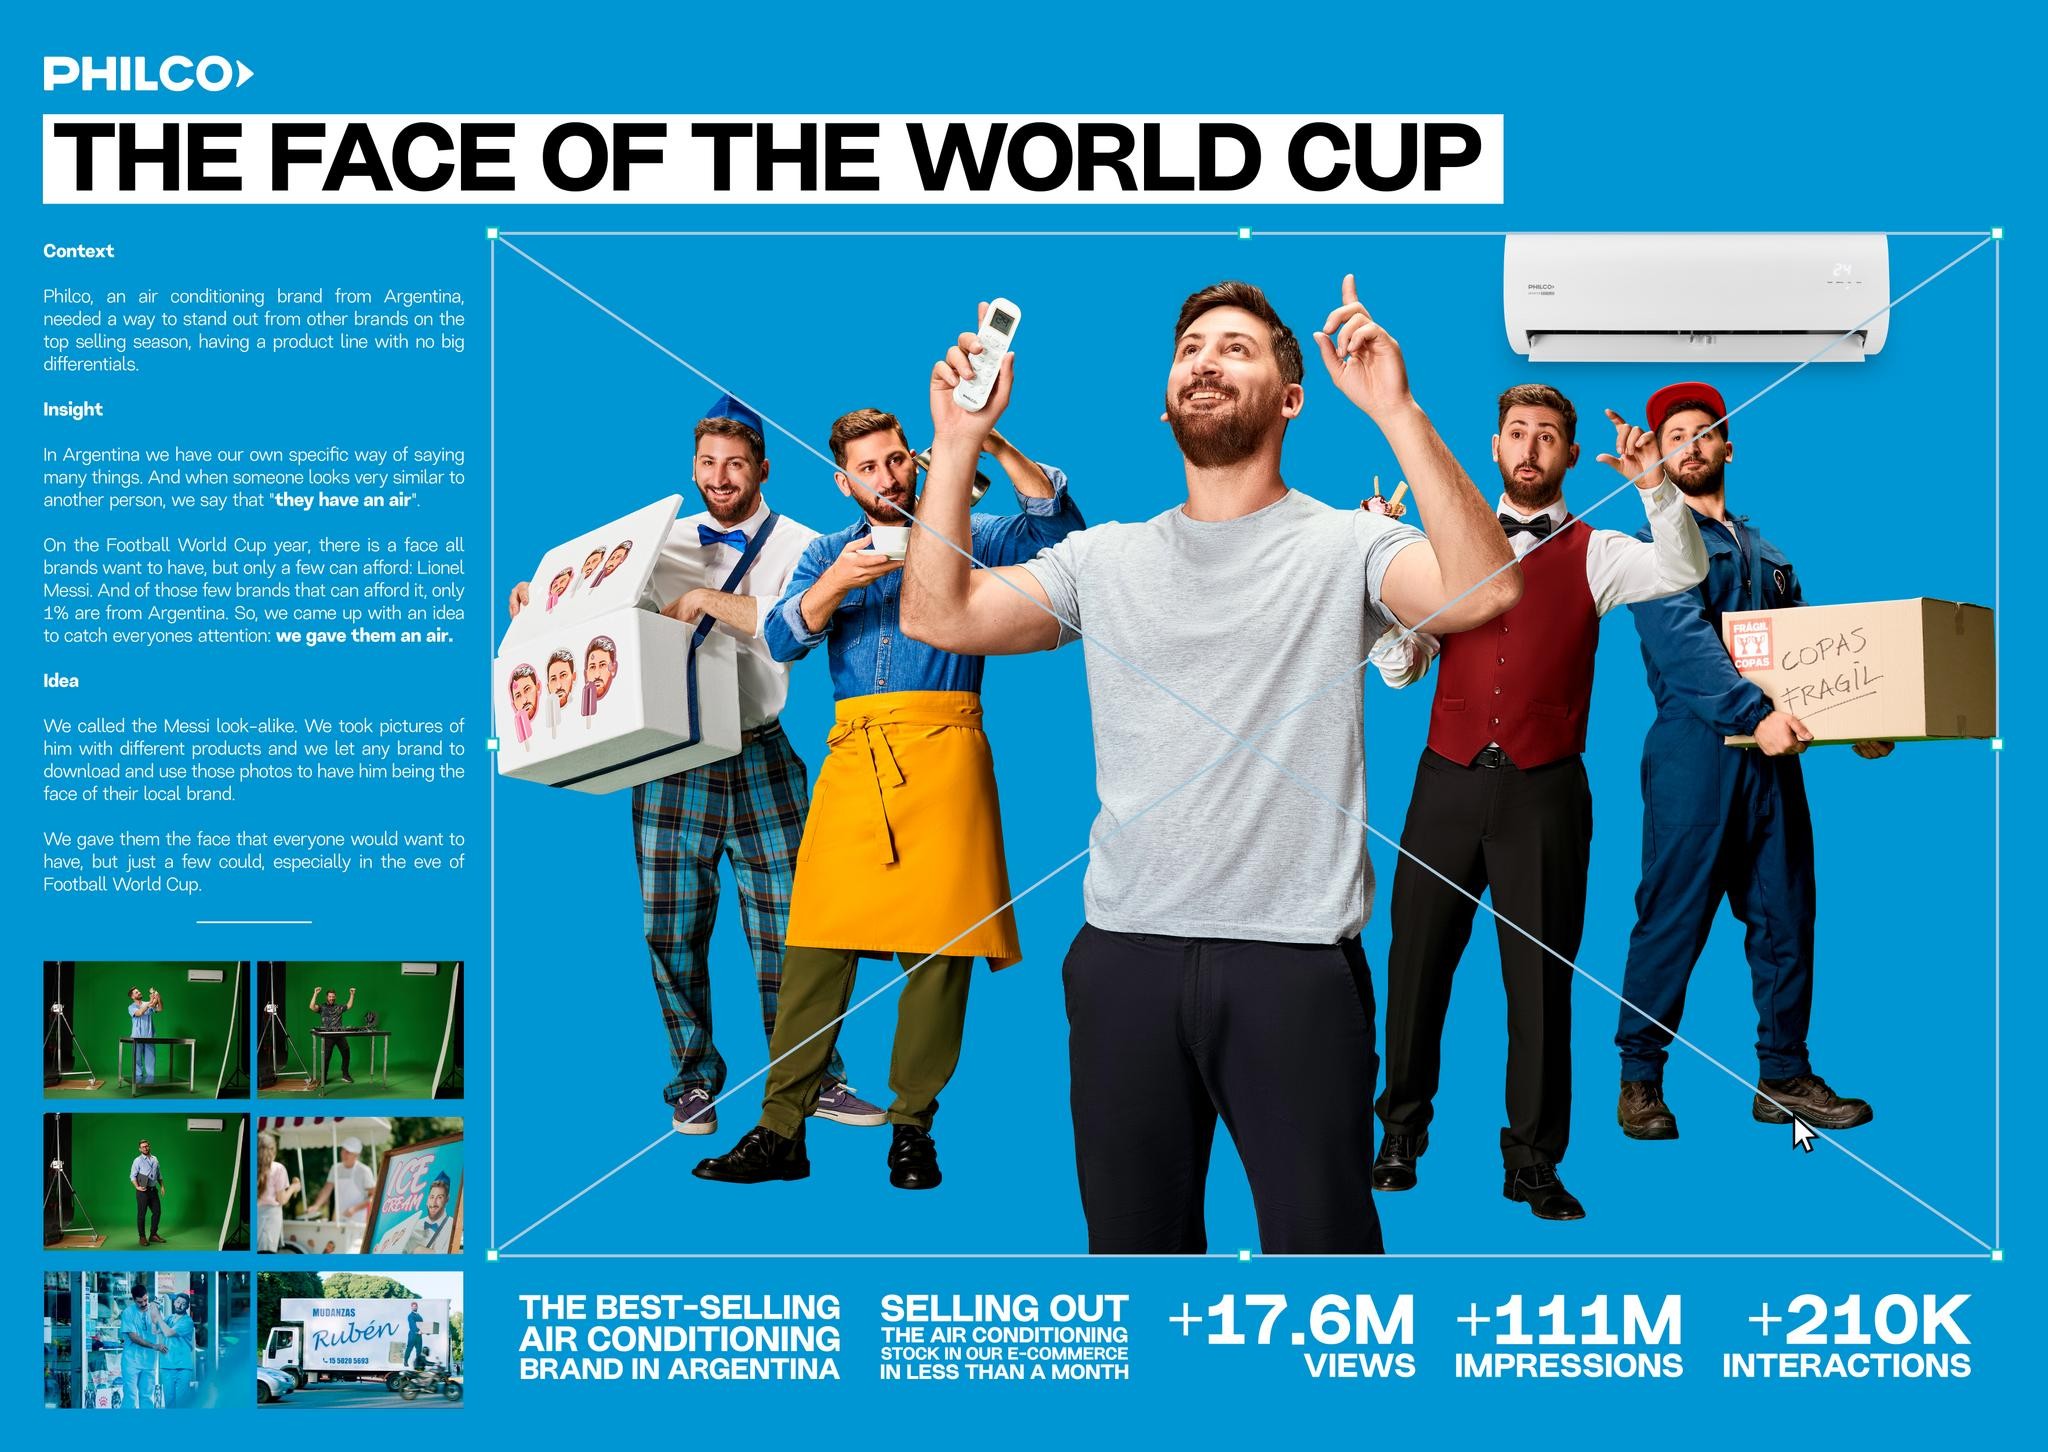 The face of the world cup